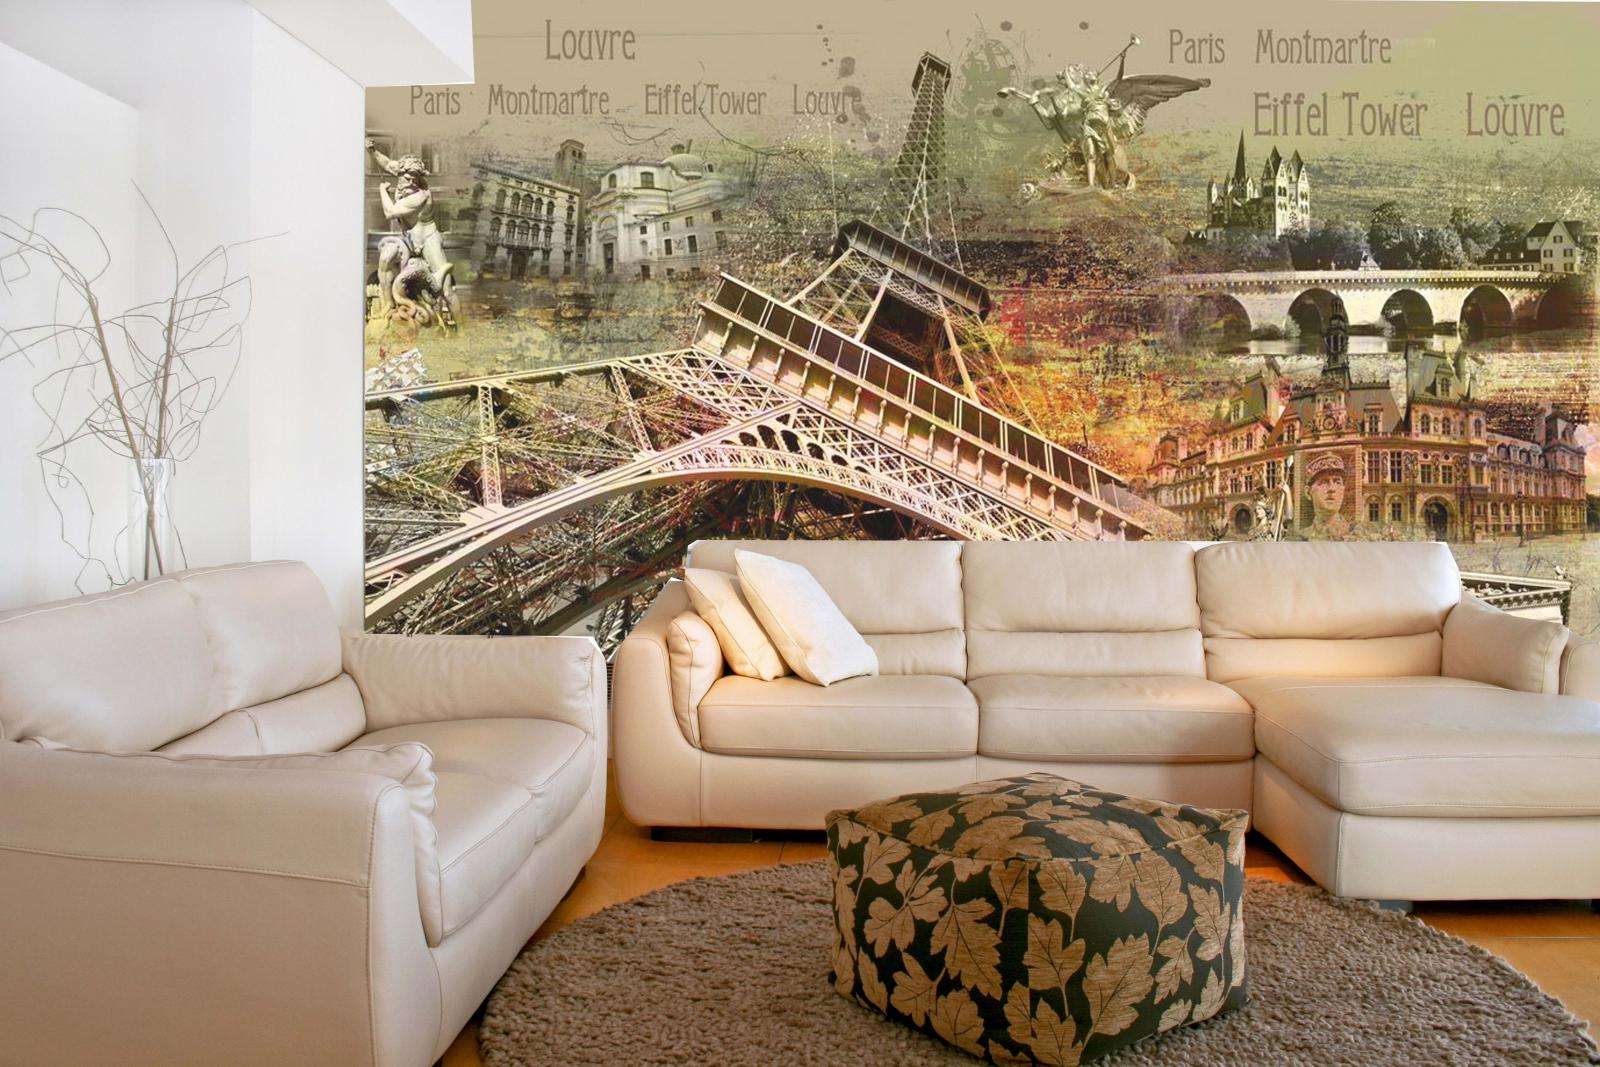 frescoes in the decor of the hallway with the image of nature